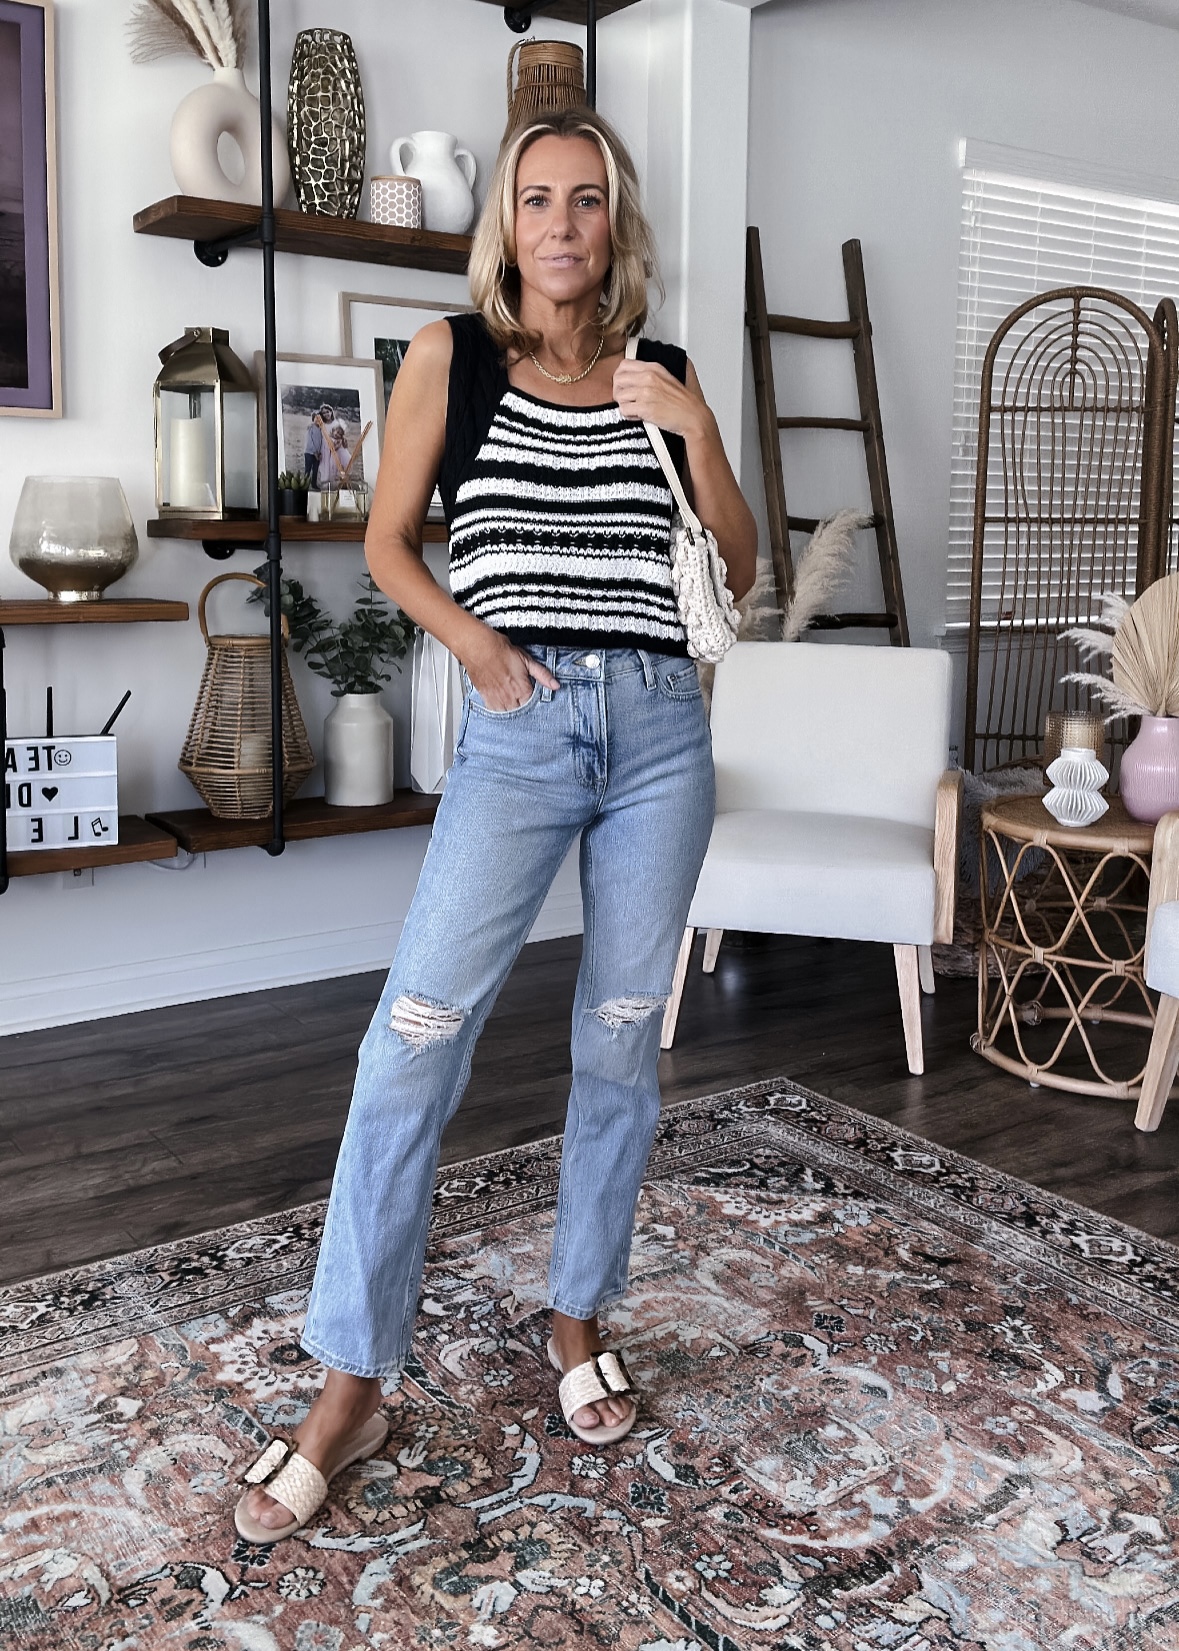 WALMART SUMMER OUTFITS-Jaclyn De Leon style. If you are on the hunt for affordable and fashionable summer outfits, then Walmart has you covered. Check out all my latest summer finds like two-piece sets, denim skirts, and dresses.